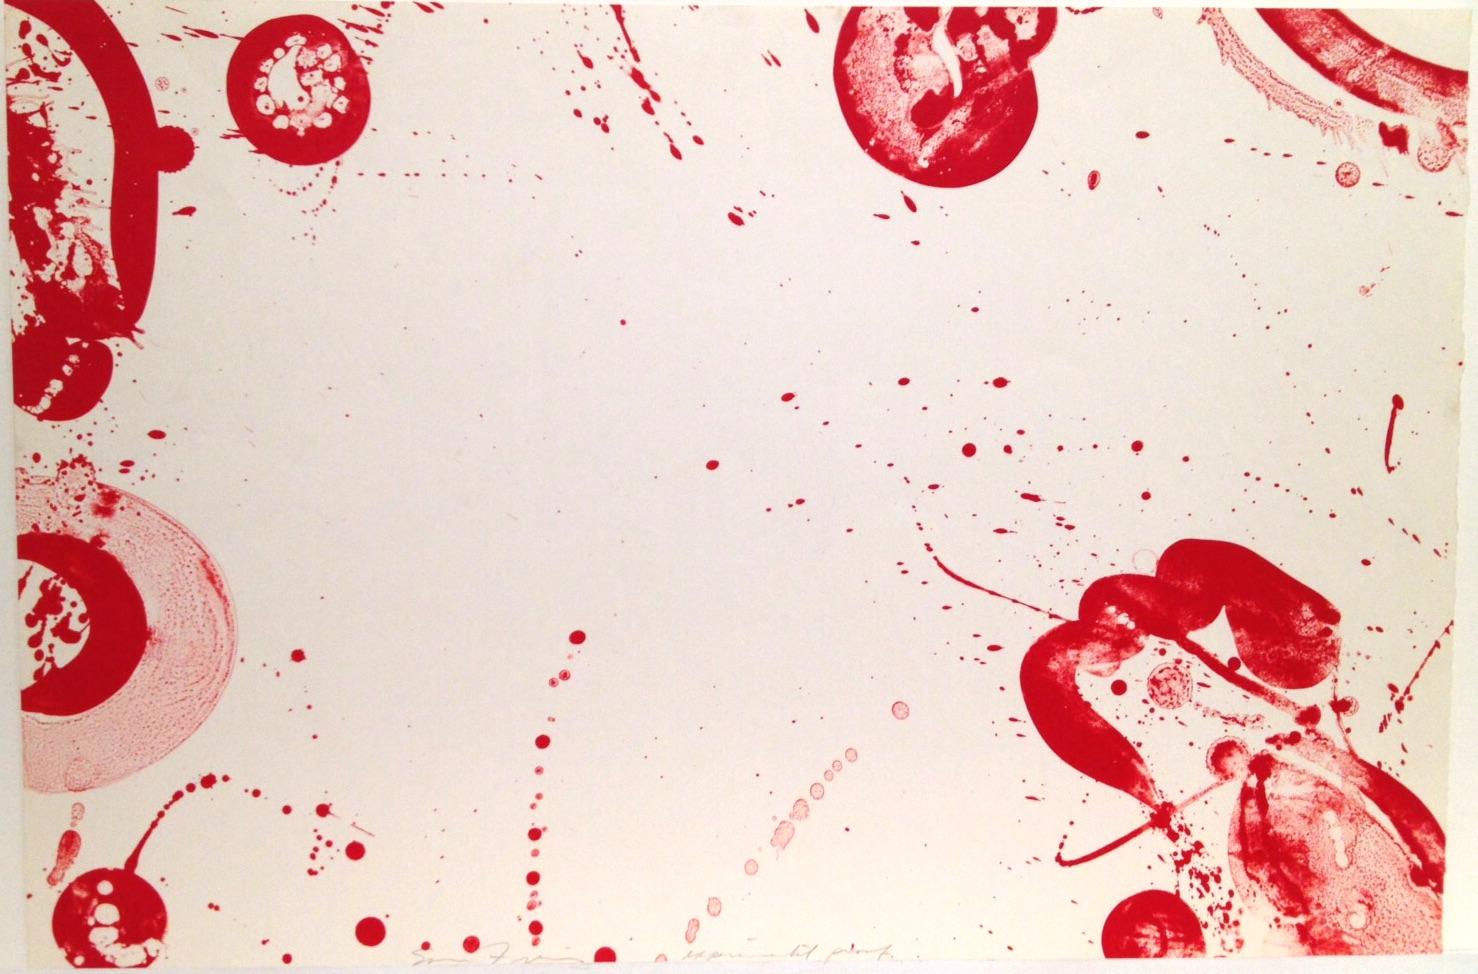 Sam Francis Abstract Print - An Other Set (Y) – From the Pasadena Box